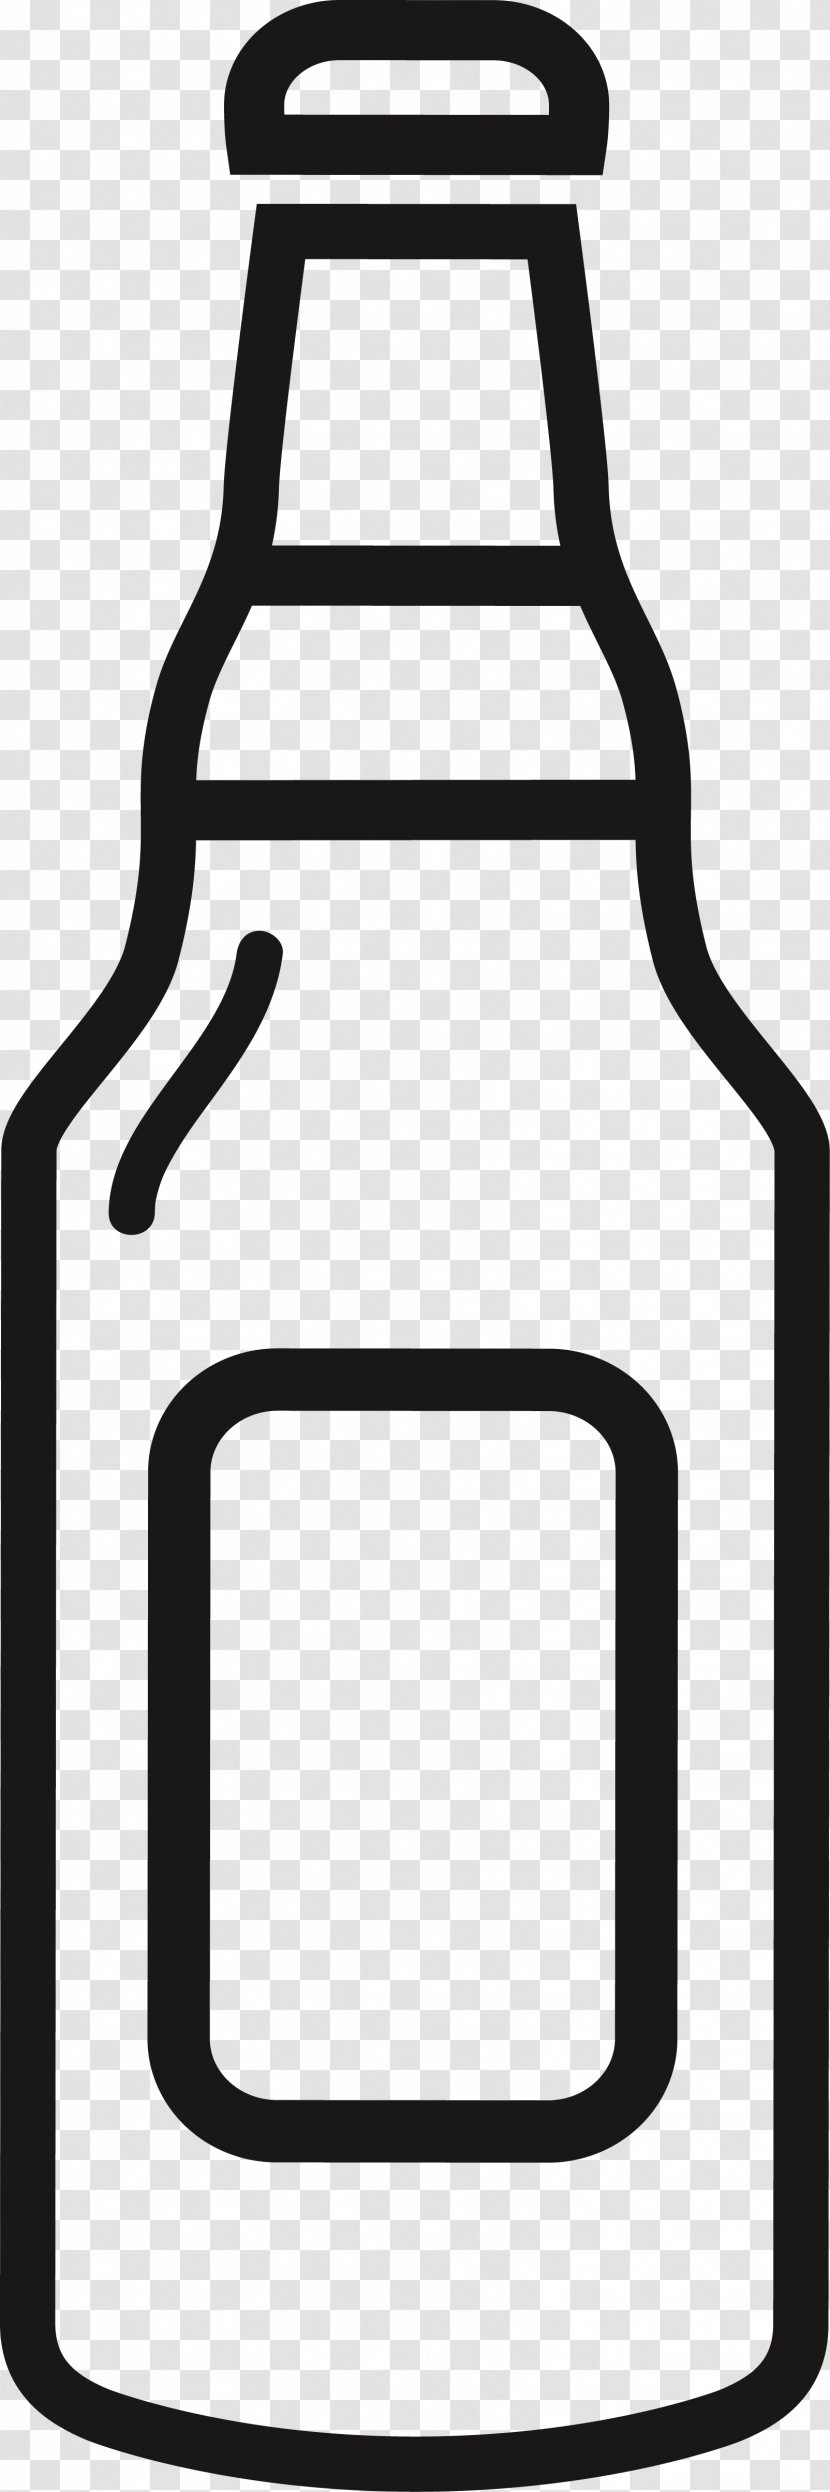 Beer Bottle Draught - Monochrome Photography Transparent PNG